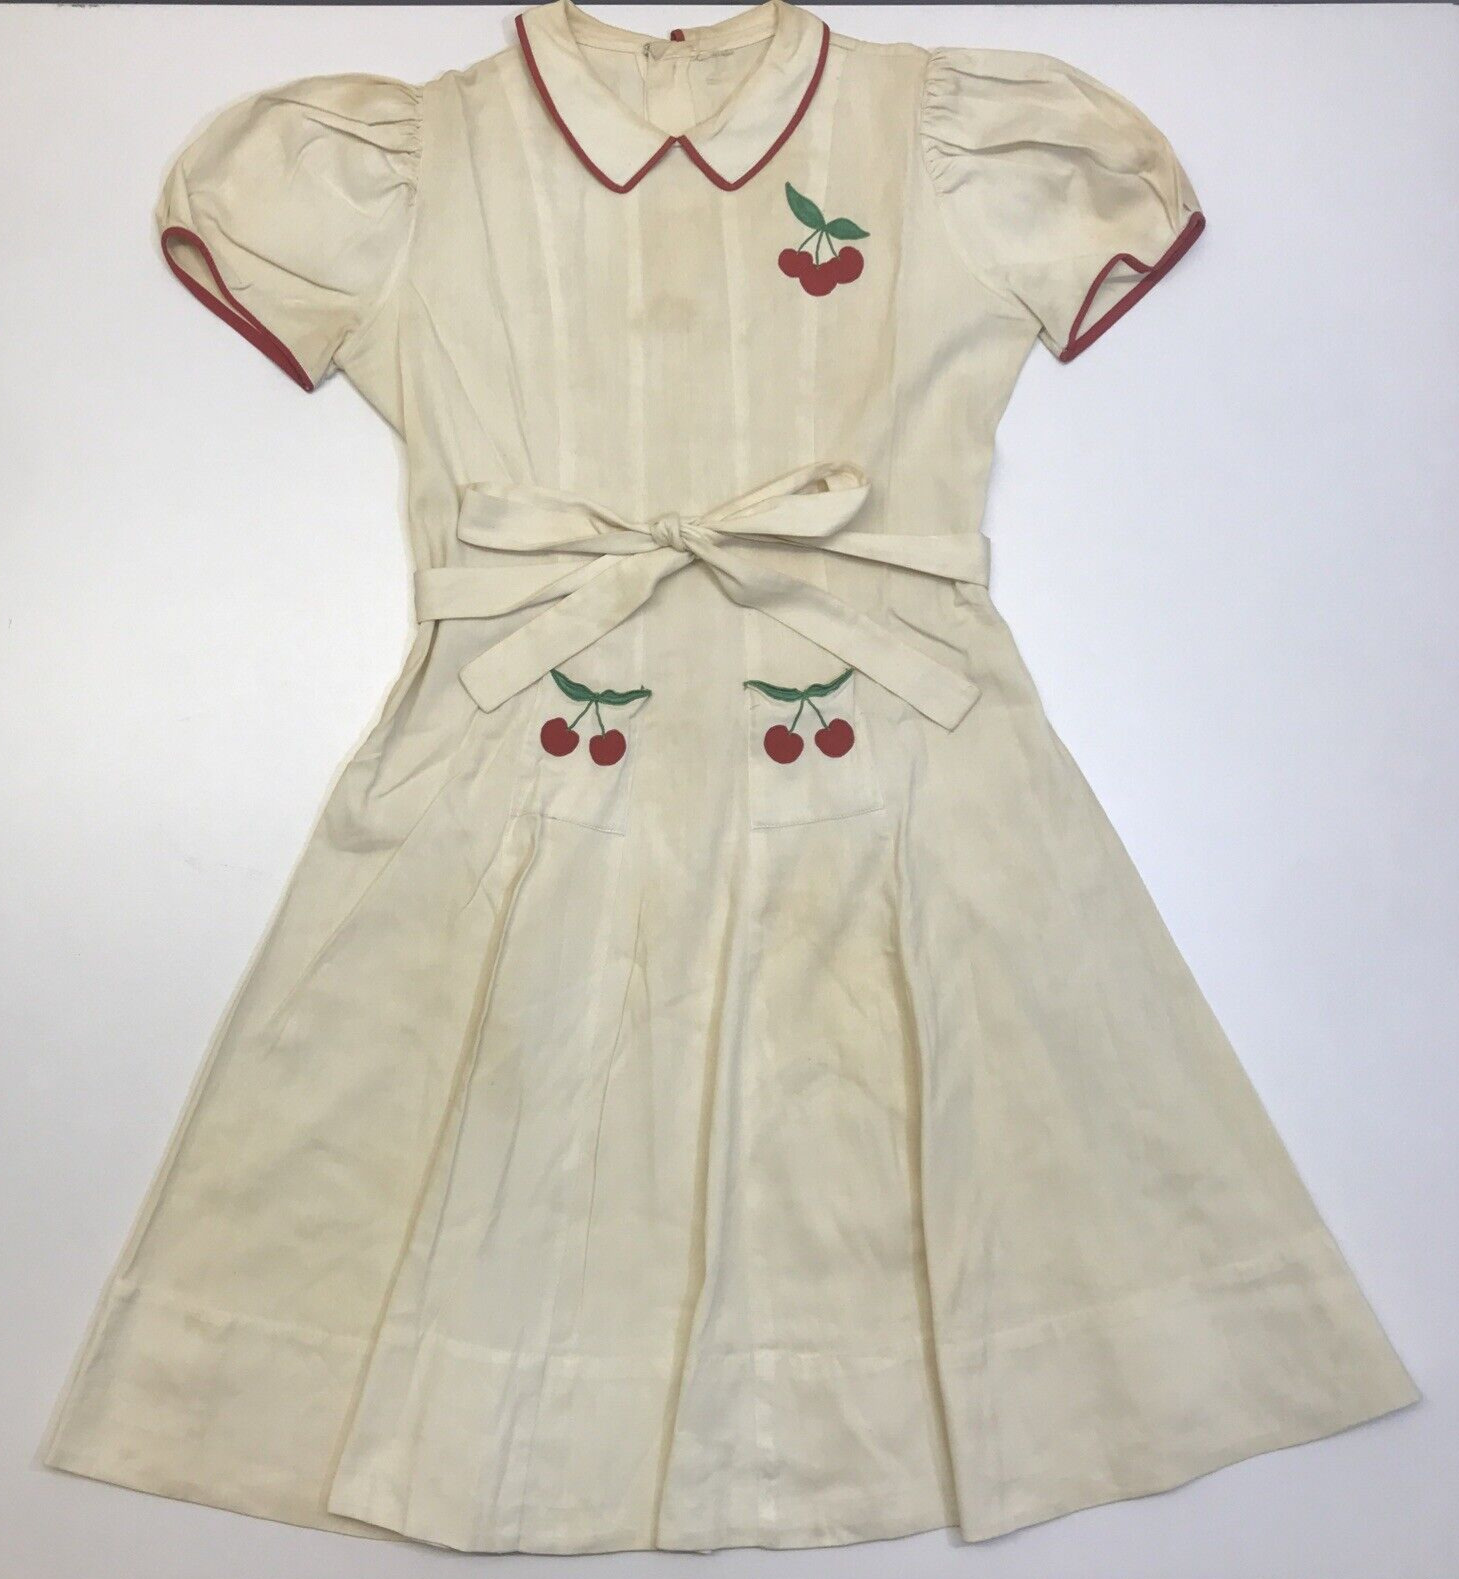 Vintage 1940s Cherry White Red Fit Flare Short Puff Sleeve Collared Retro Dress